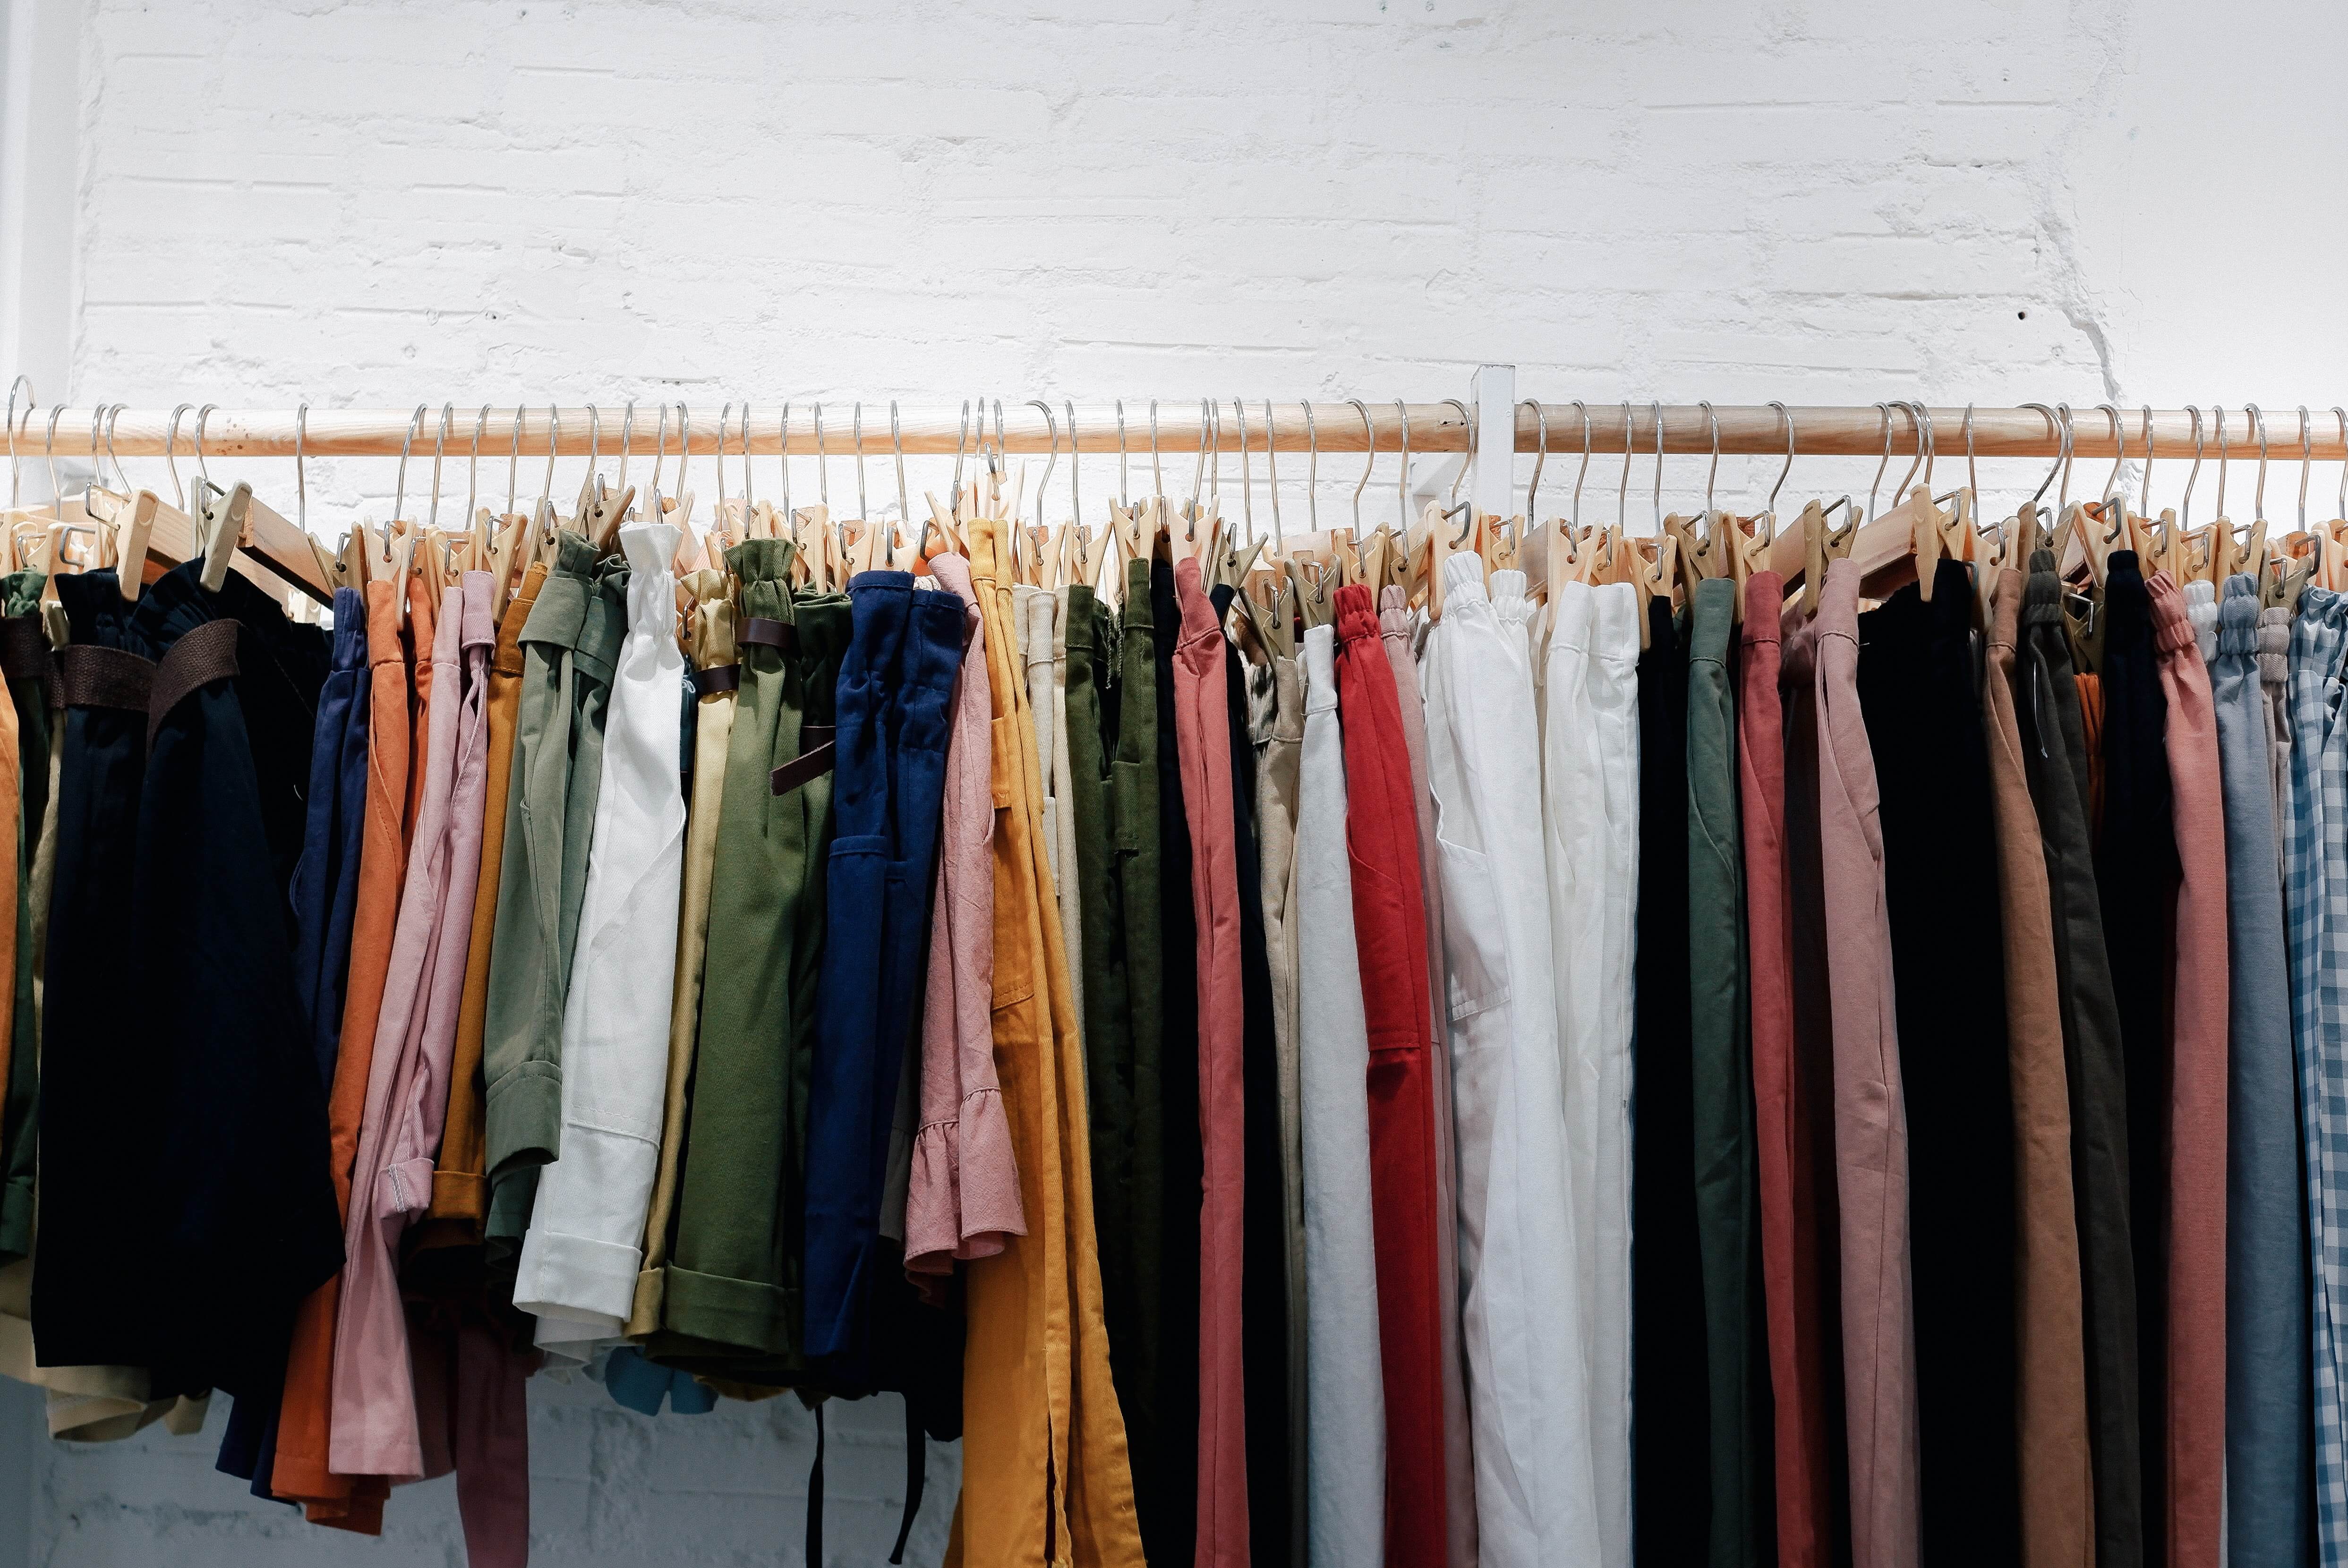 A rack of various colored pants